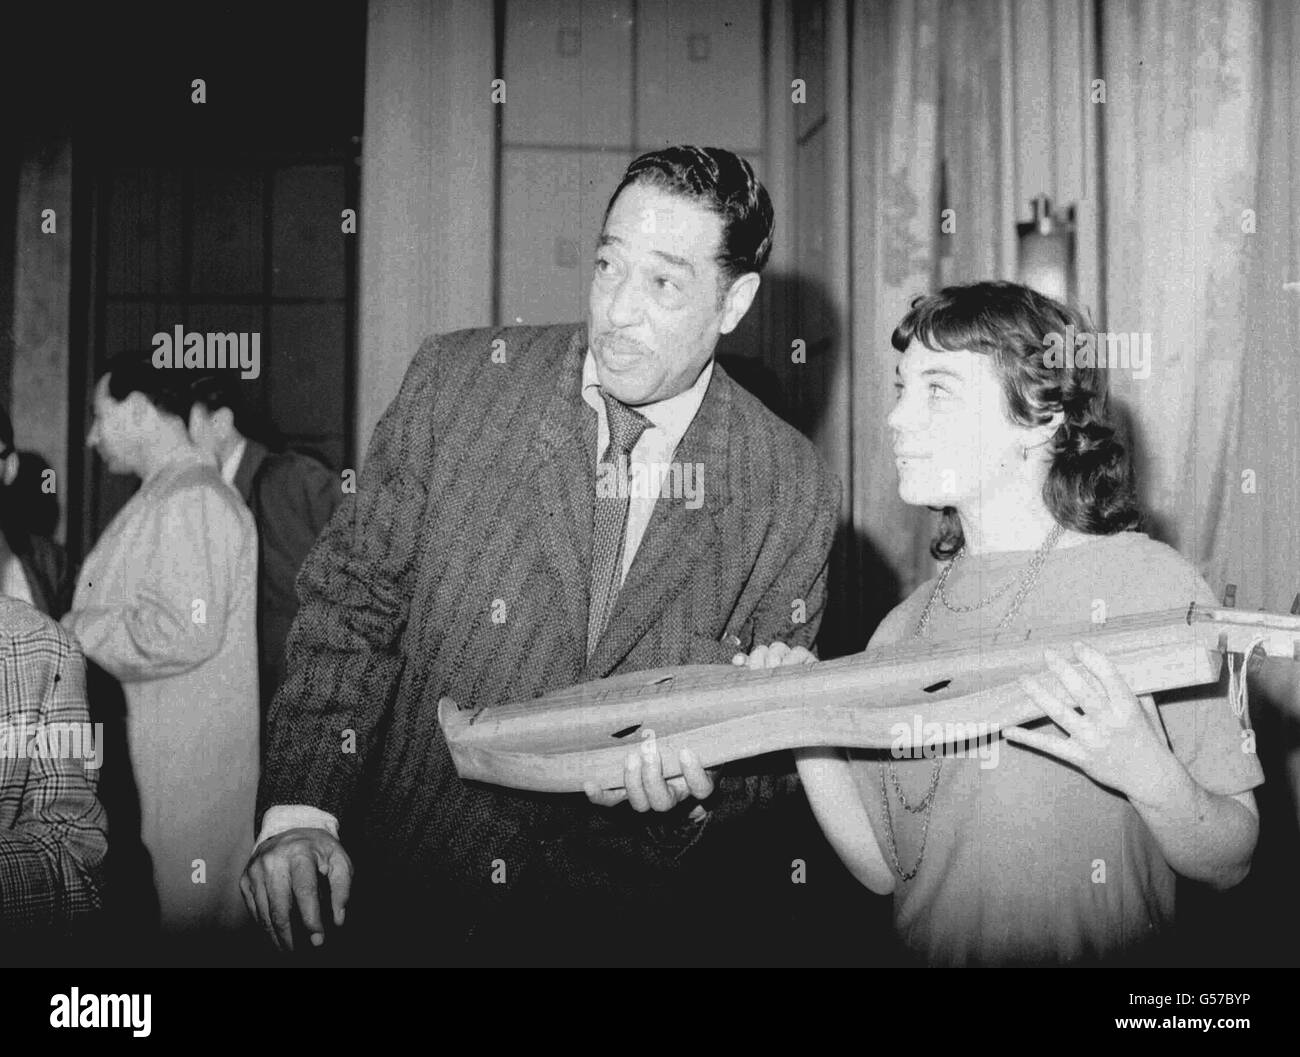 American bandleader Duke Ellington with fellow passenger Gina Glaser, 21, from New York, onboard the French Line's 'Ile de France' arriving at Plymouth, where the Duke is touring the British Isles with his band. Stock Photo